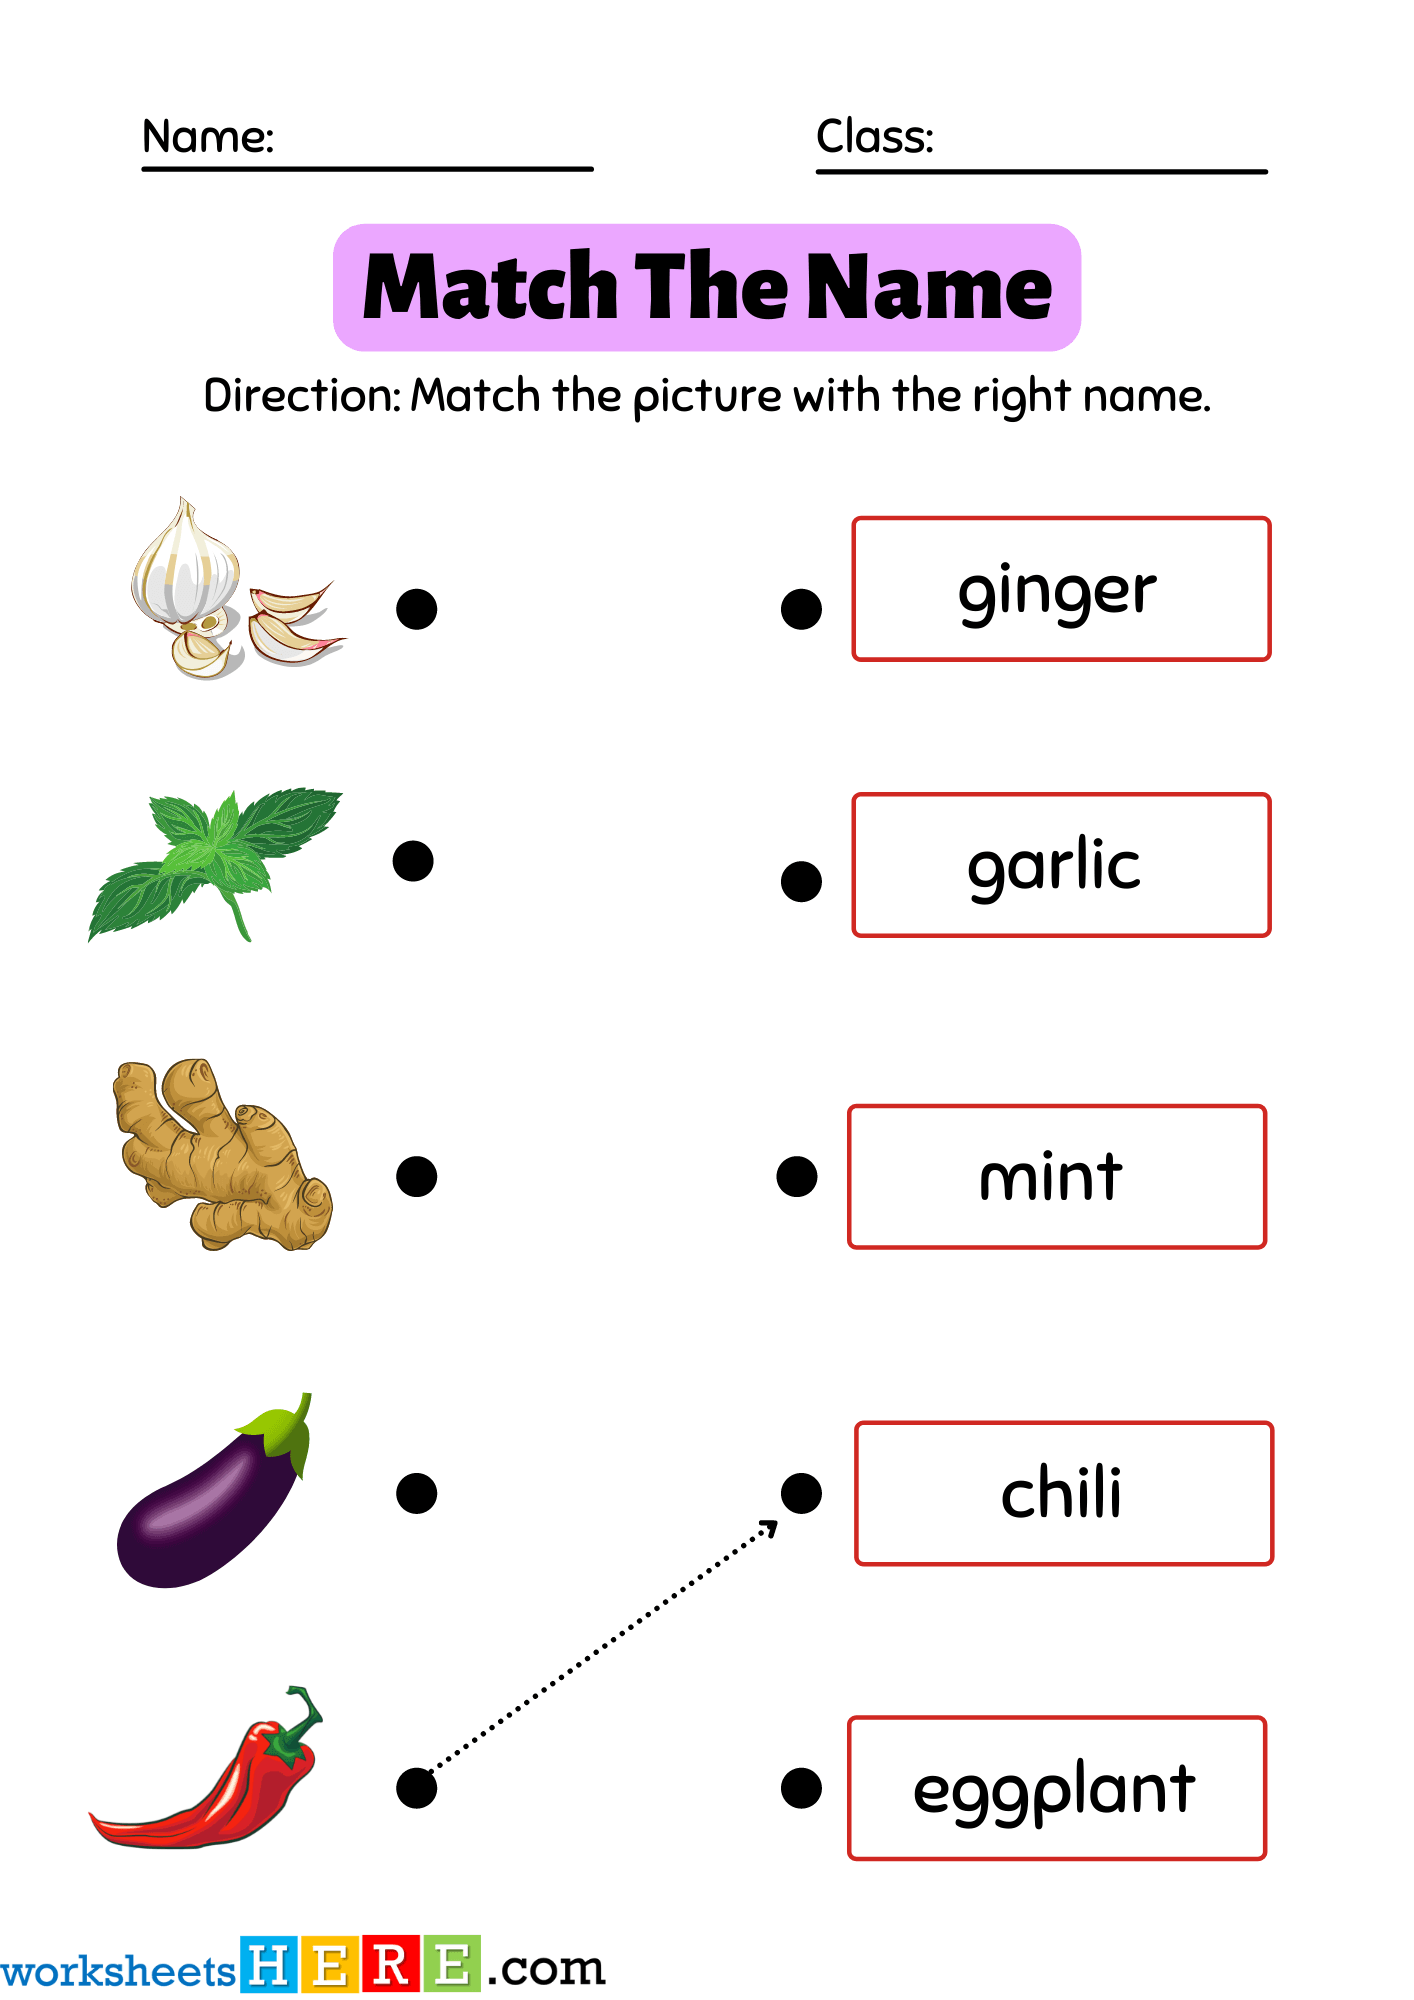 Match The Name with Vegetables Pictures PDF Worksheets For Students